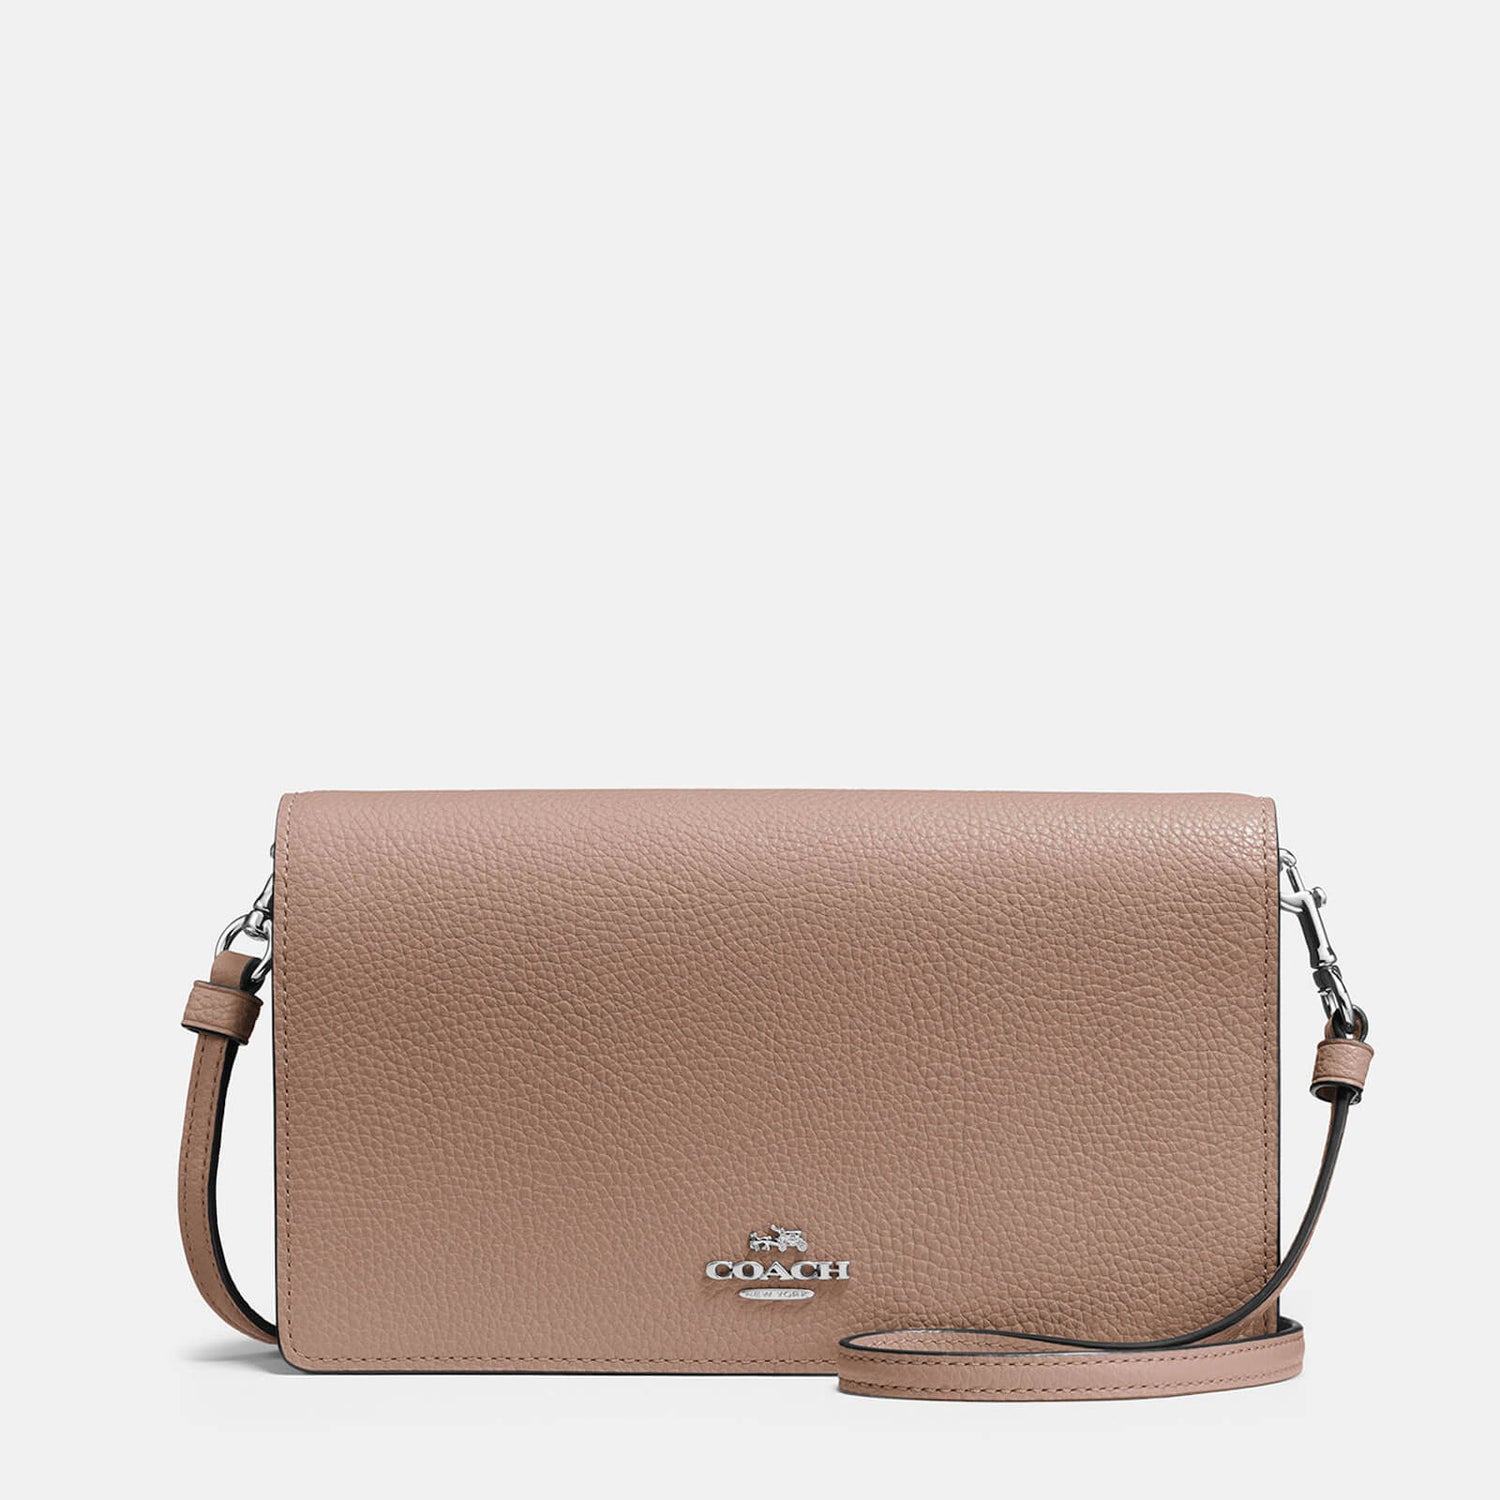 Coach Women's Polished Pebble Hayden - Taupe